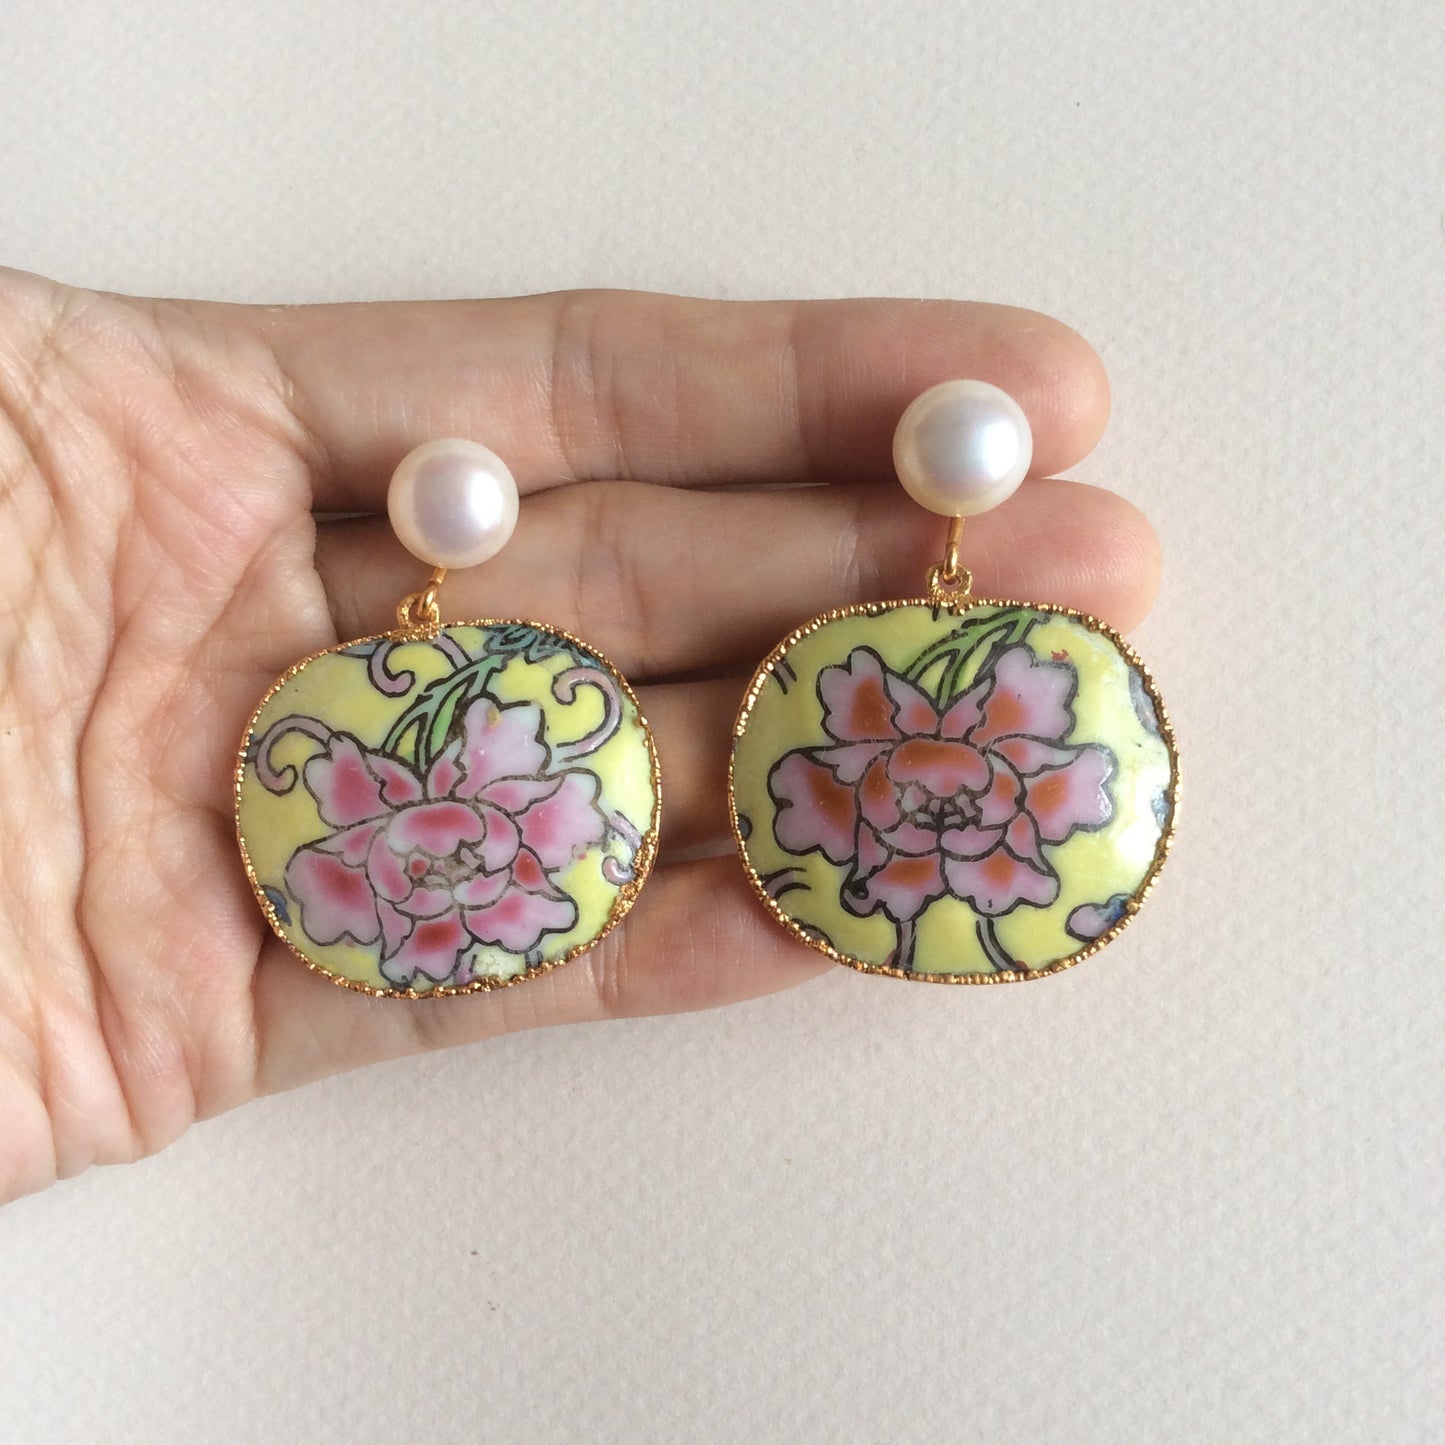 Imperial yellow peony porcelain earrings with freshwater pearl studs